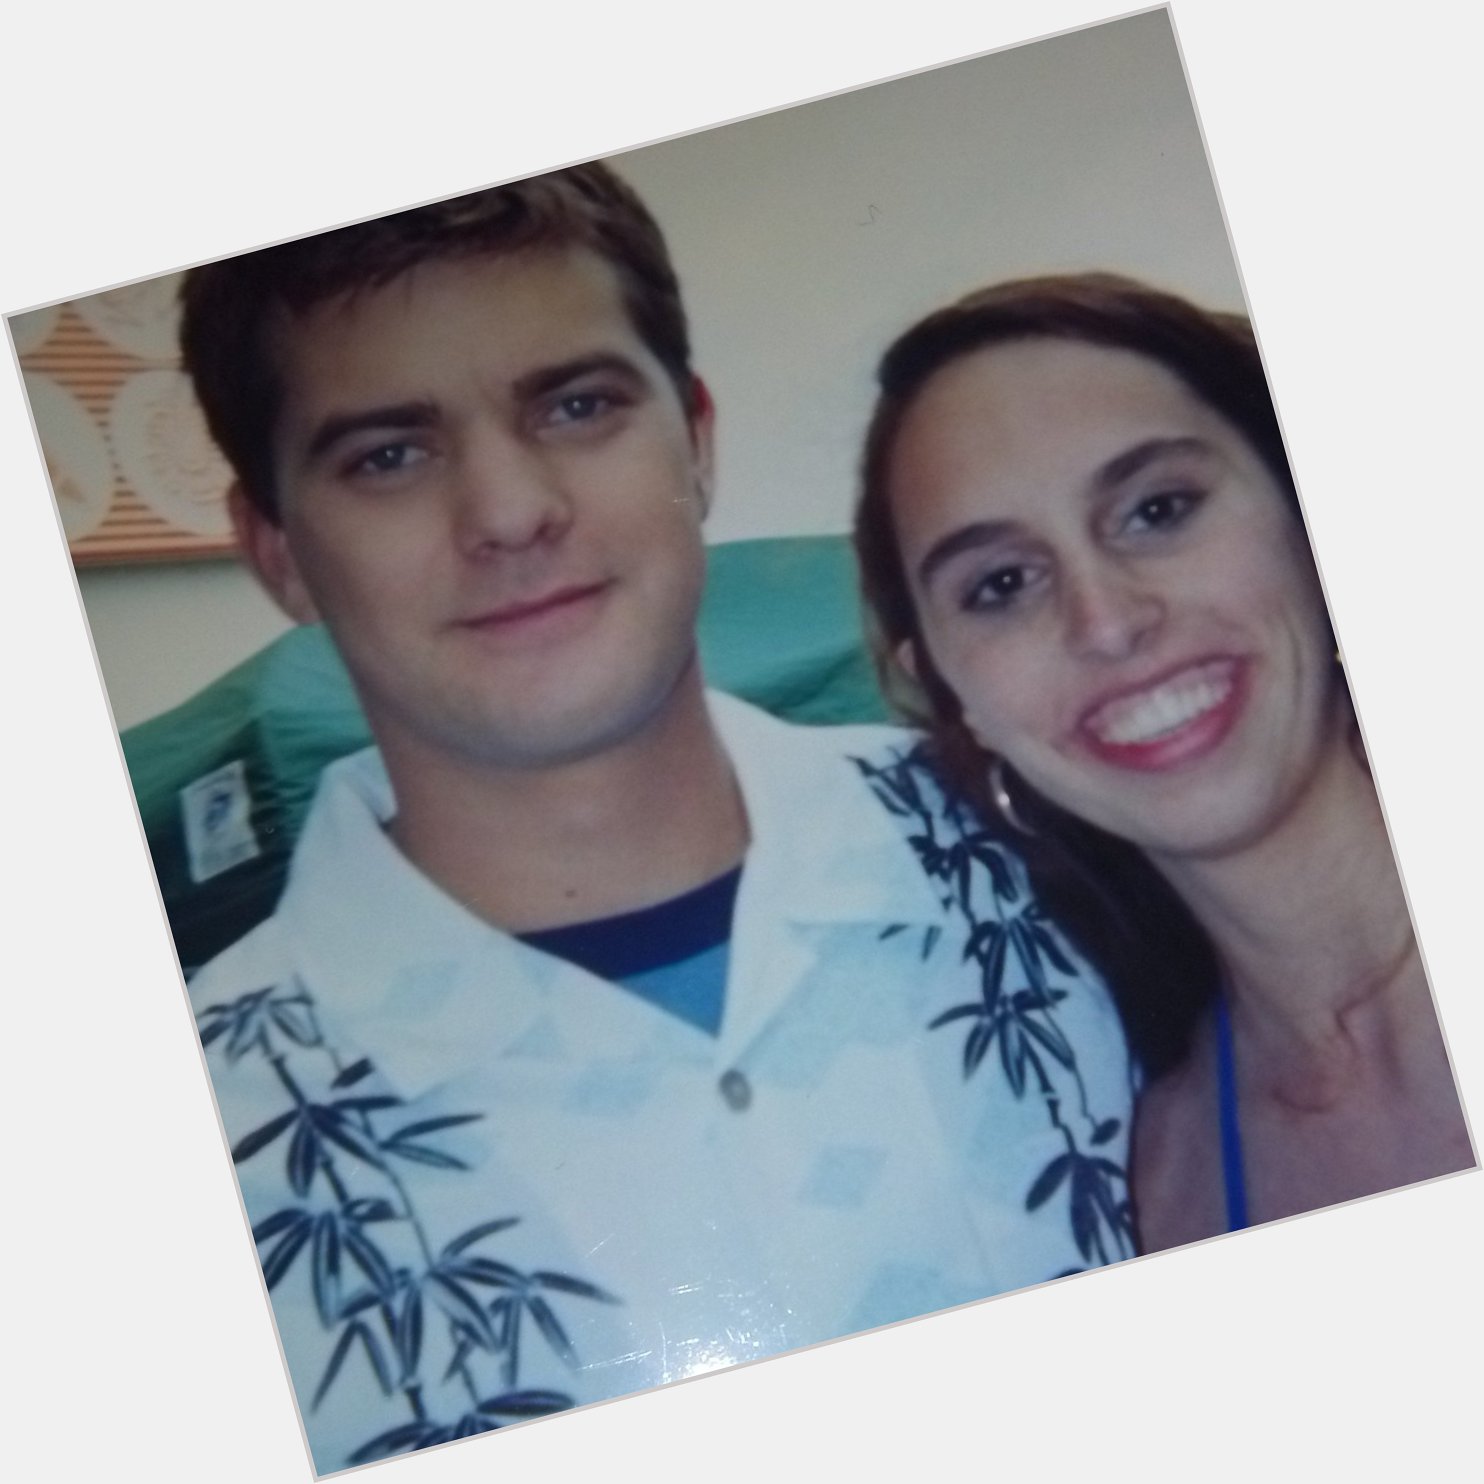 Happy Birthday to Joshua Jackson, who I met when I was 18 as an extra on Dawson\s Creek. He was so sweet! 